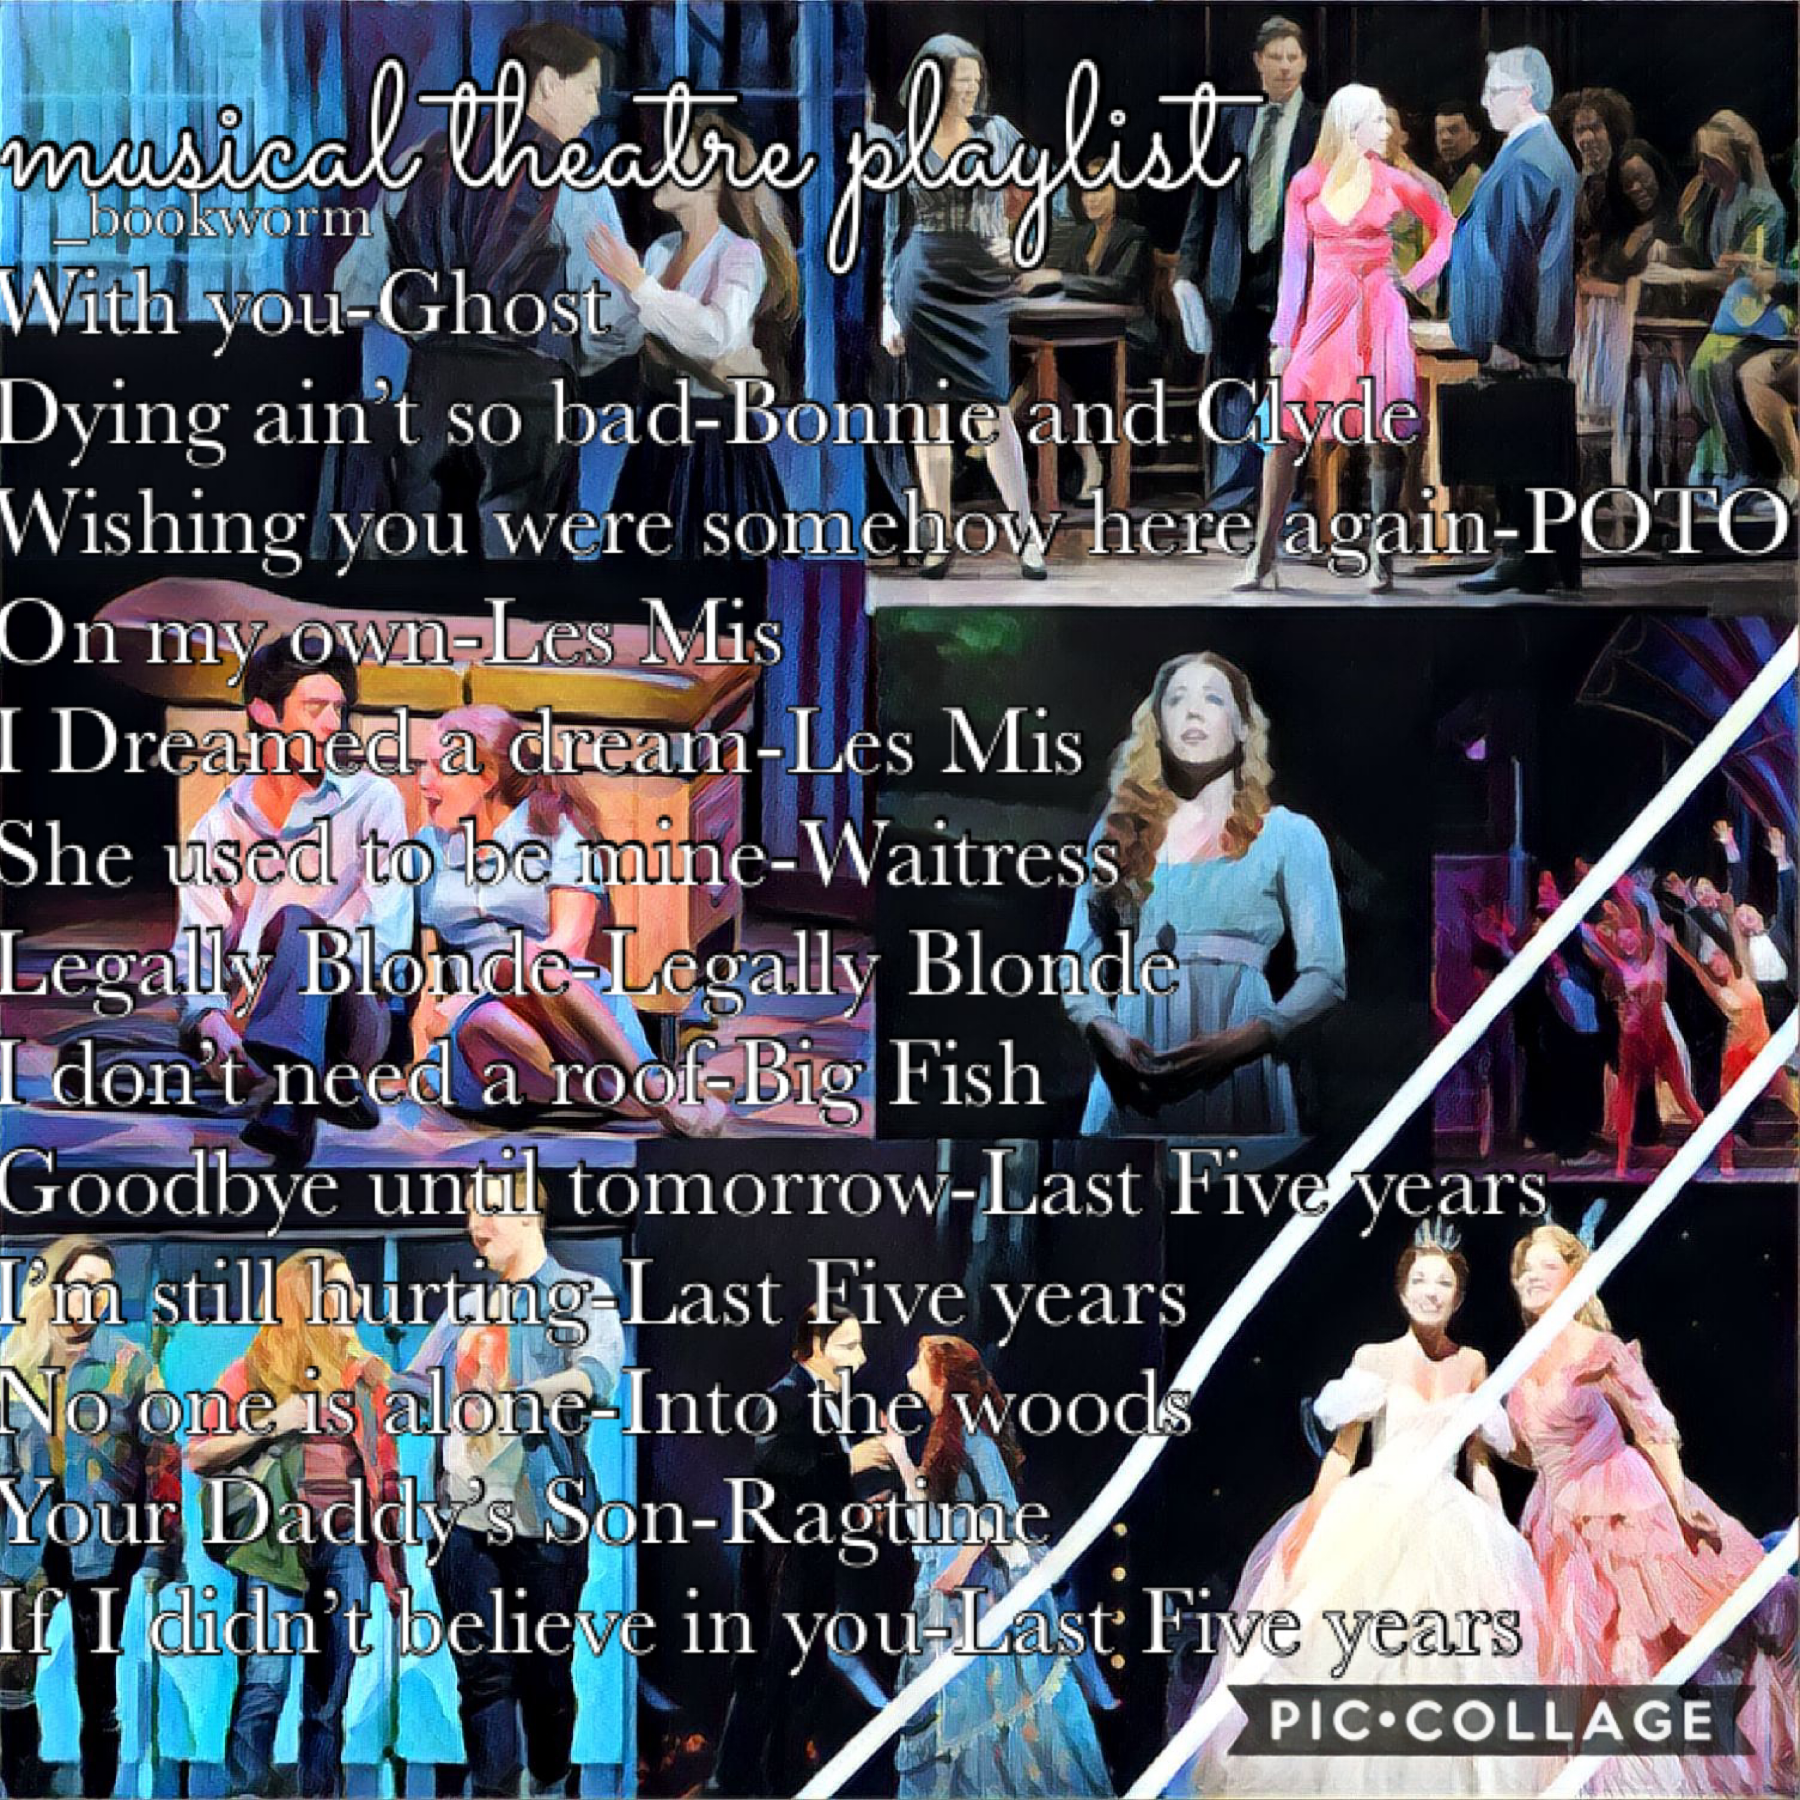 -tap-

hi 👋🏼 I’m kinda back
But this is a playlist with the saddest musical theatre songs(notice how many songs are from the last five years 💀💀)
🍵🍵🍵🍵🍵🍵🍵🍵🍵🍵🍵🍵🍵
QOTD-Favorite underrated musical?
AOTD-Bonnie and Clyde or Ghost the musical ✌🏼